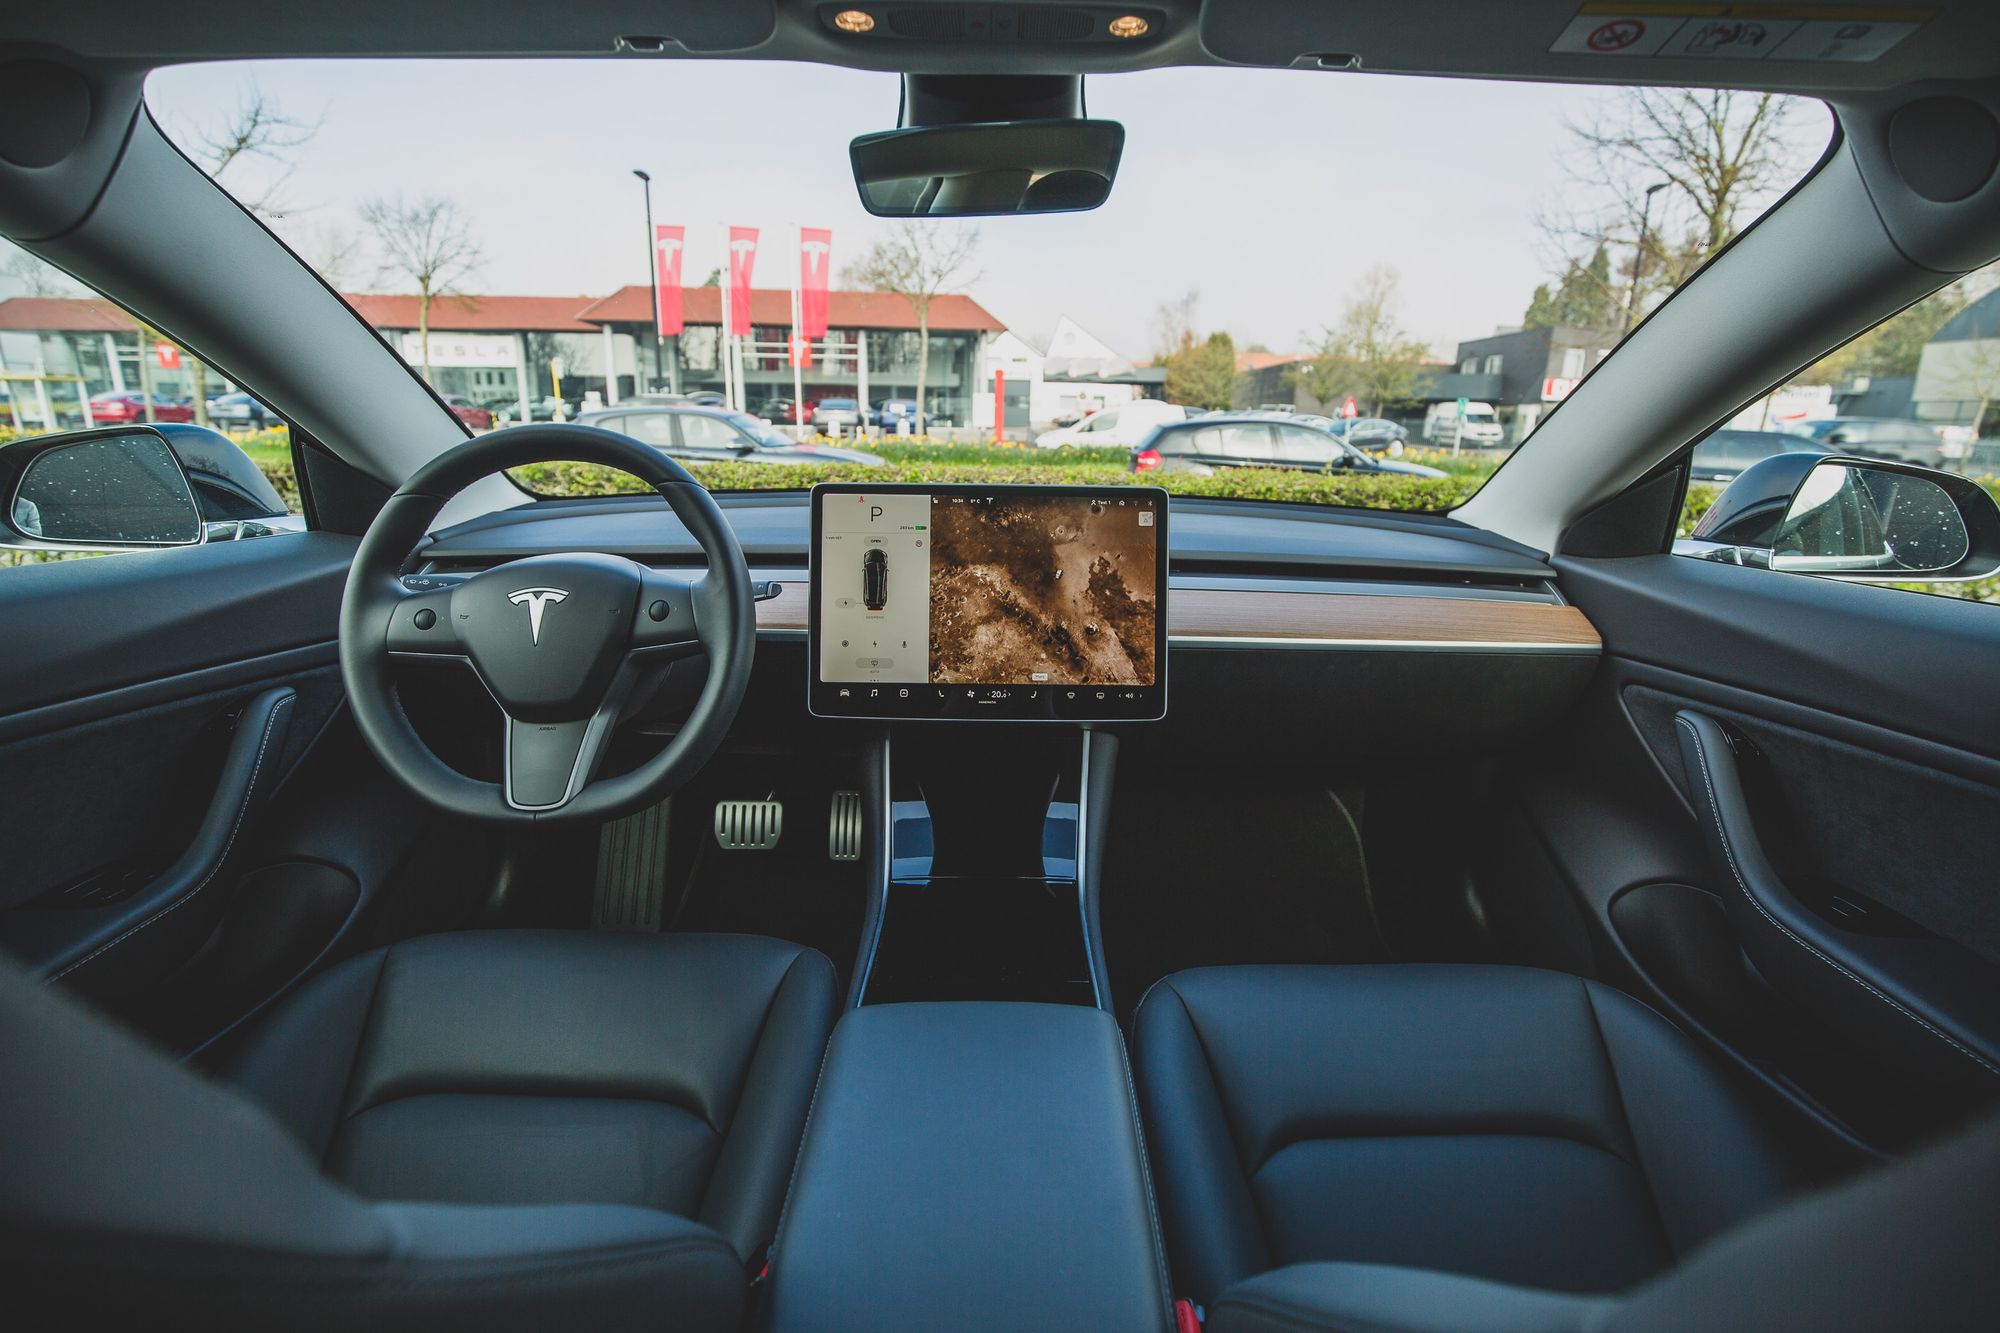 Self-driving cars: a moral imperative